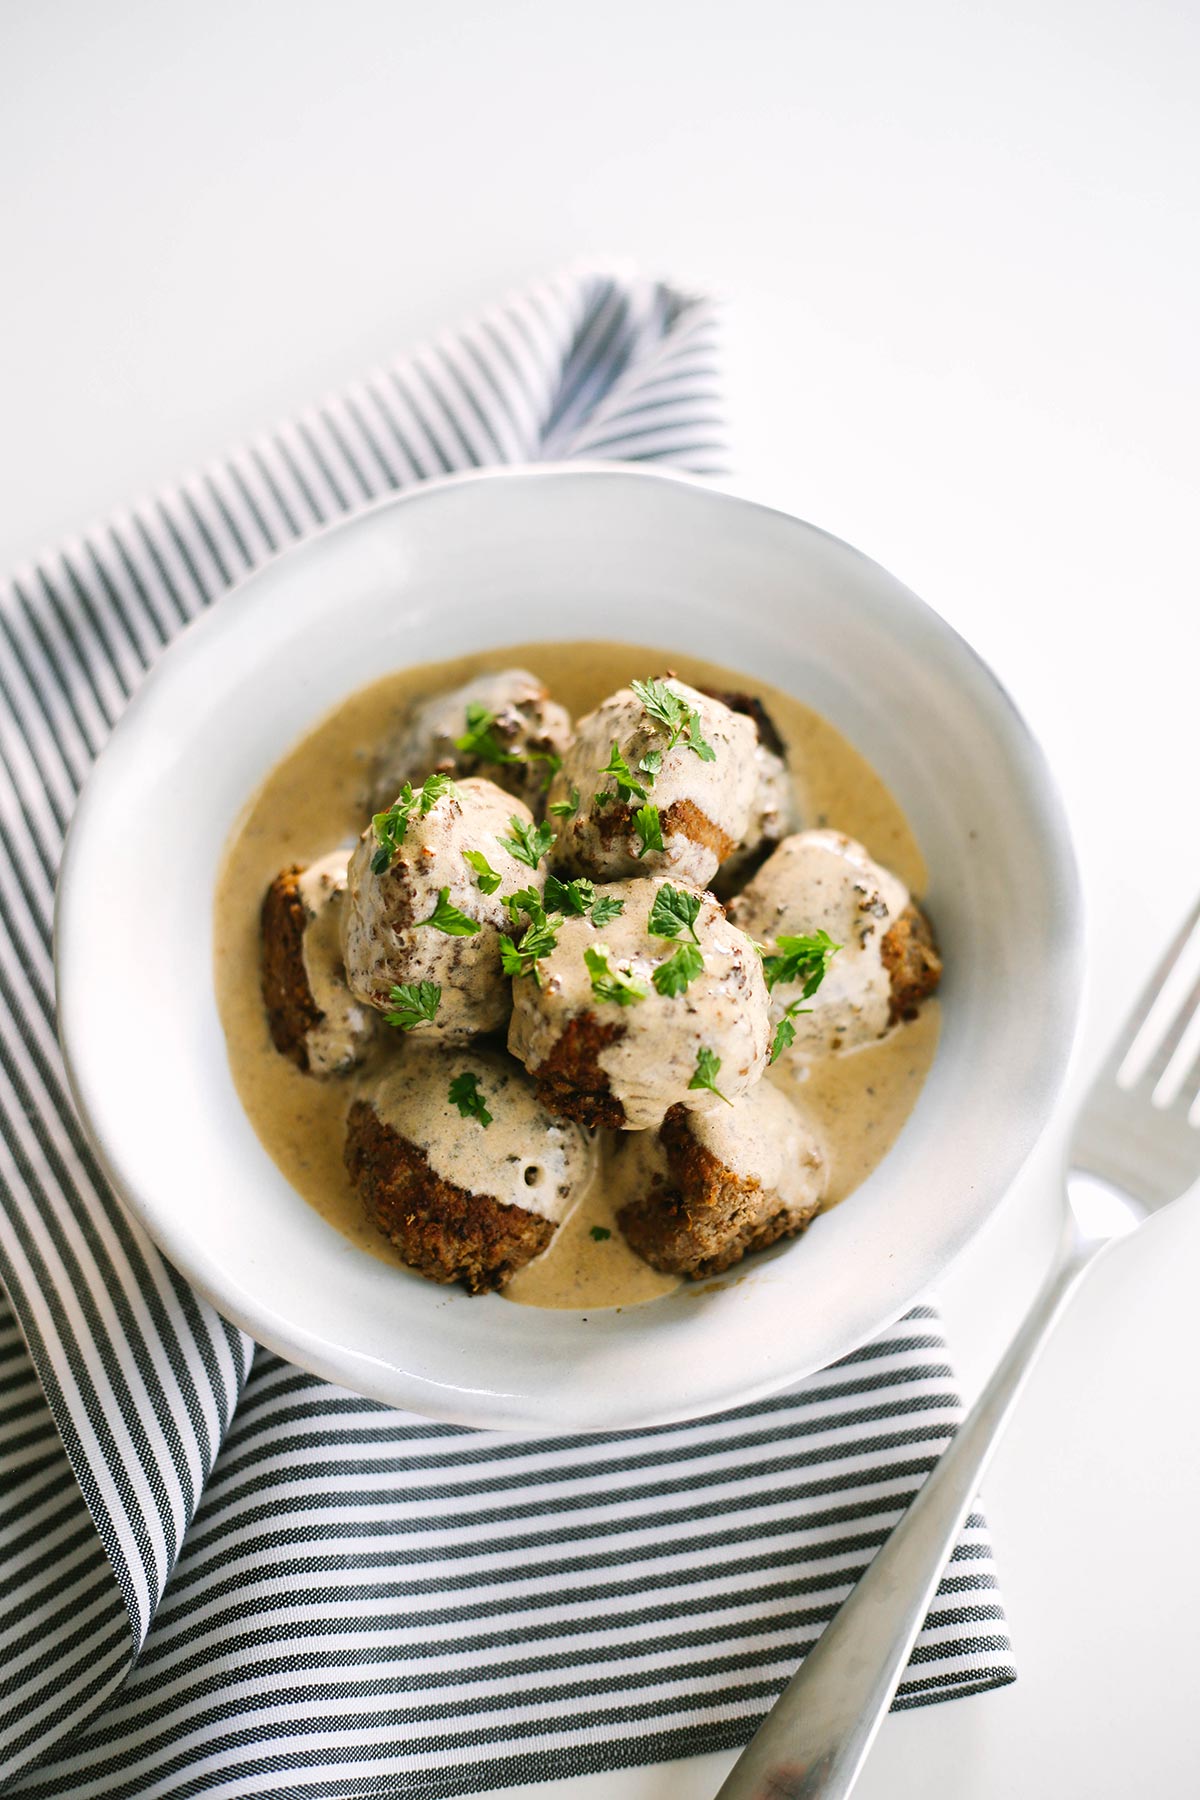 Keto Swedish meatballs for low carb. Easy recipe with allspice and gravy.